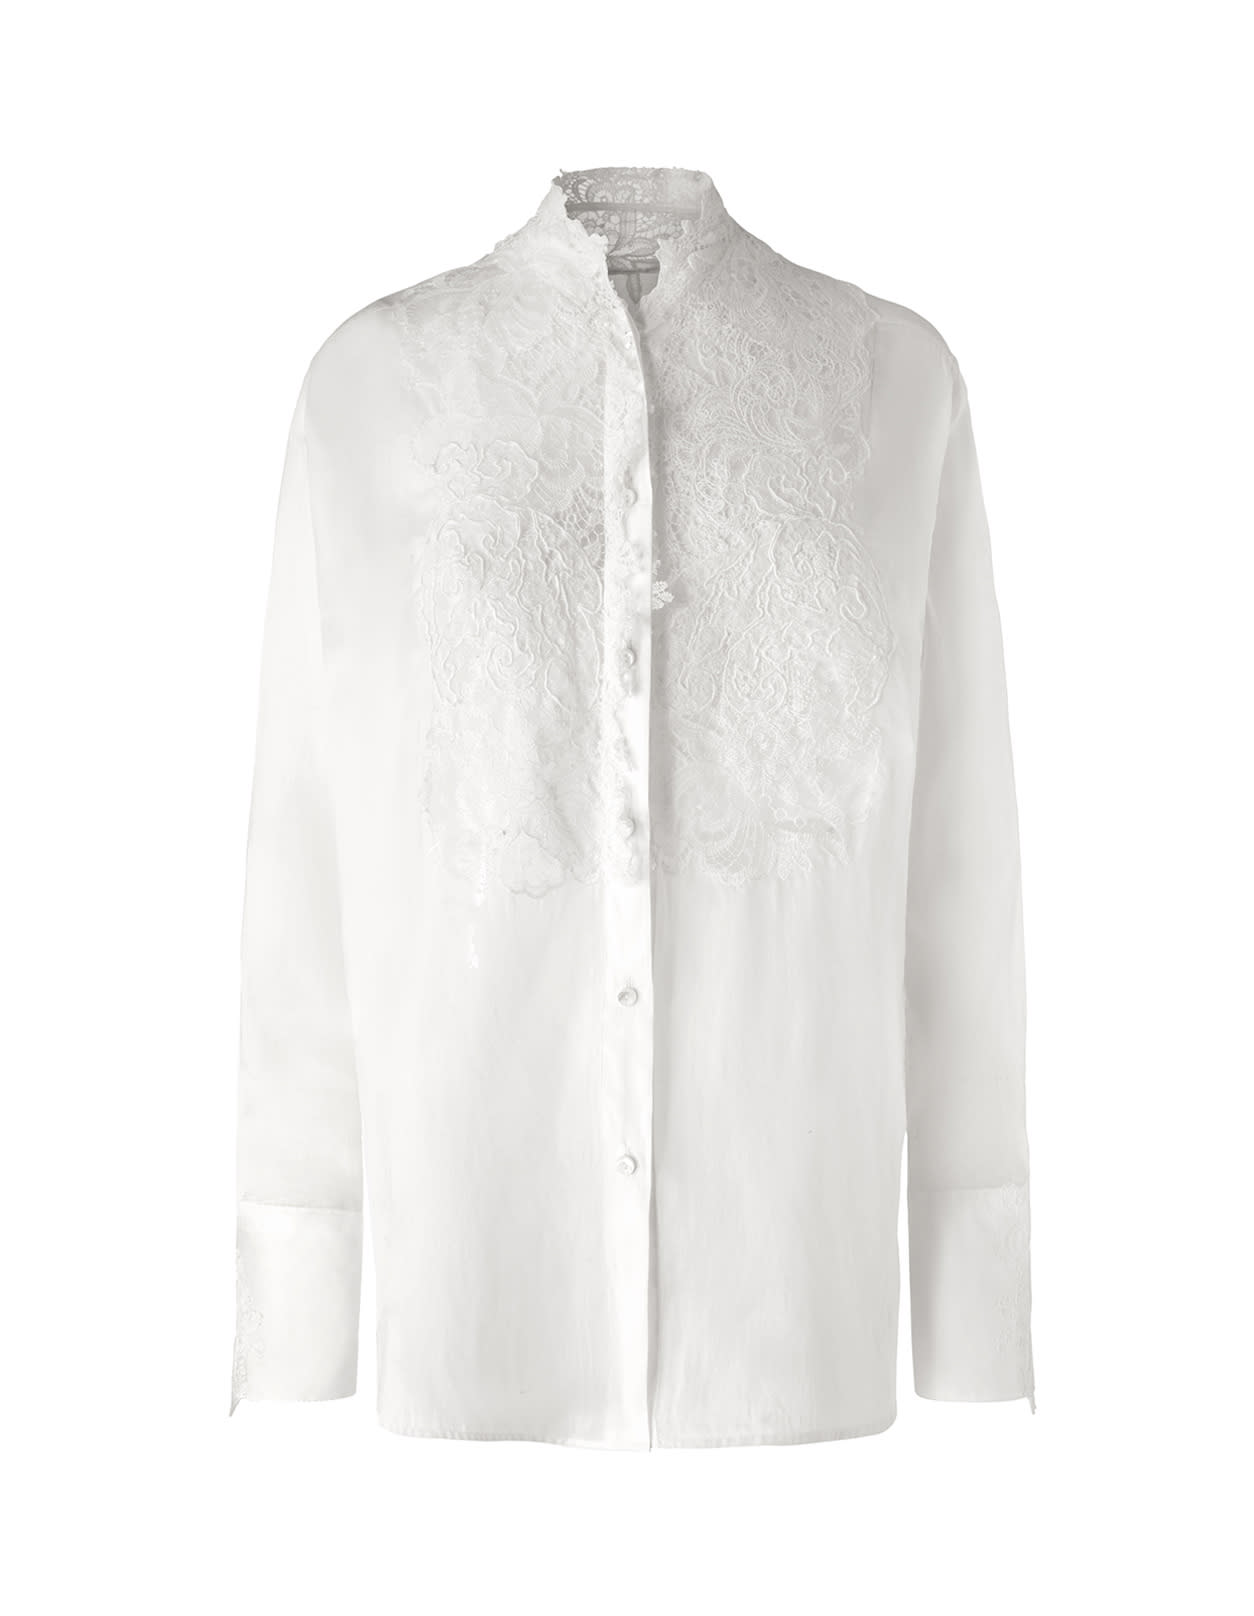 Ermanno Scervino White Muslin And Lace Shirt